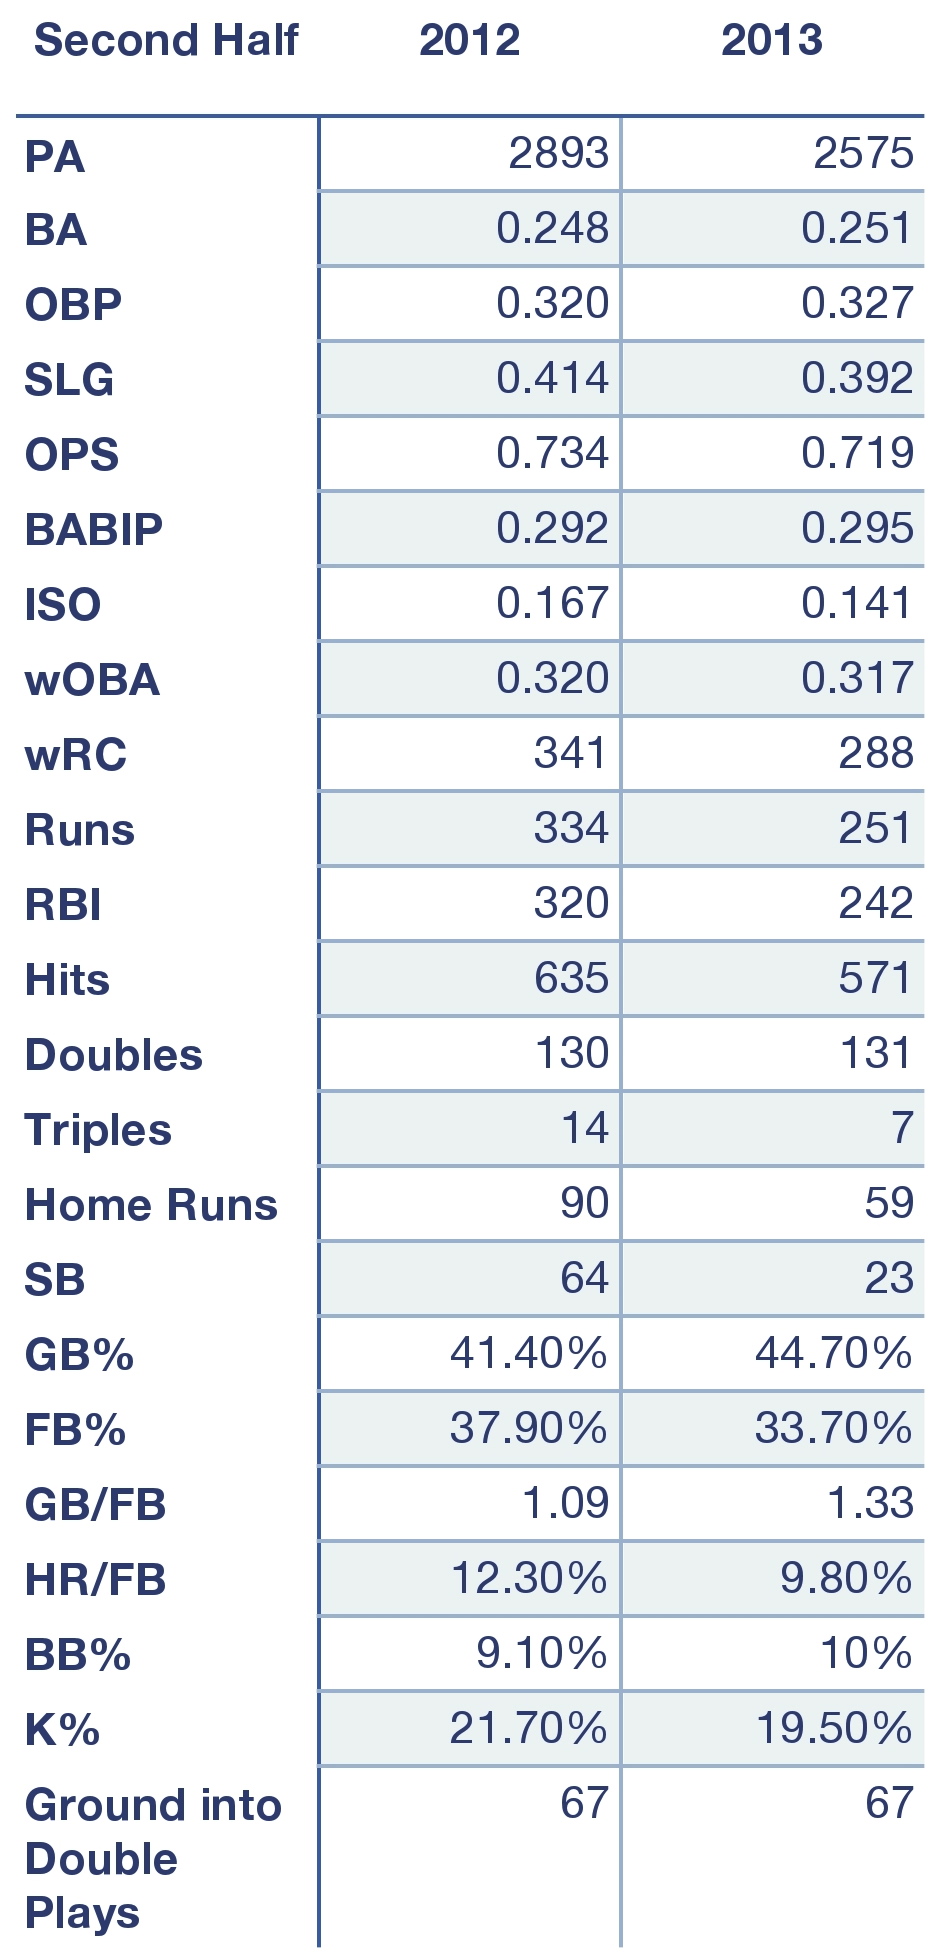 Rays second half offensive production in 2012 and 2013.